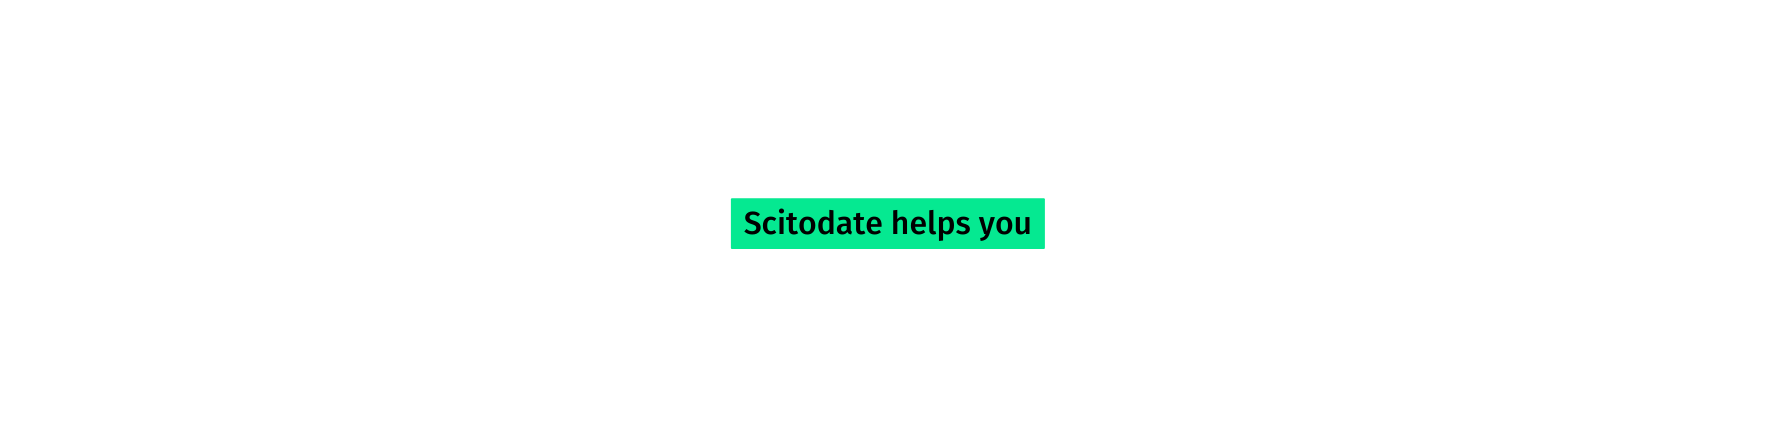 Scitodate helps you